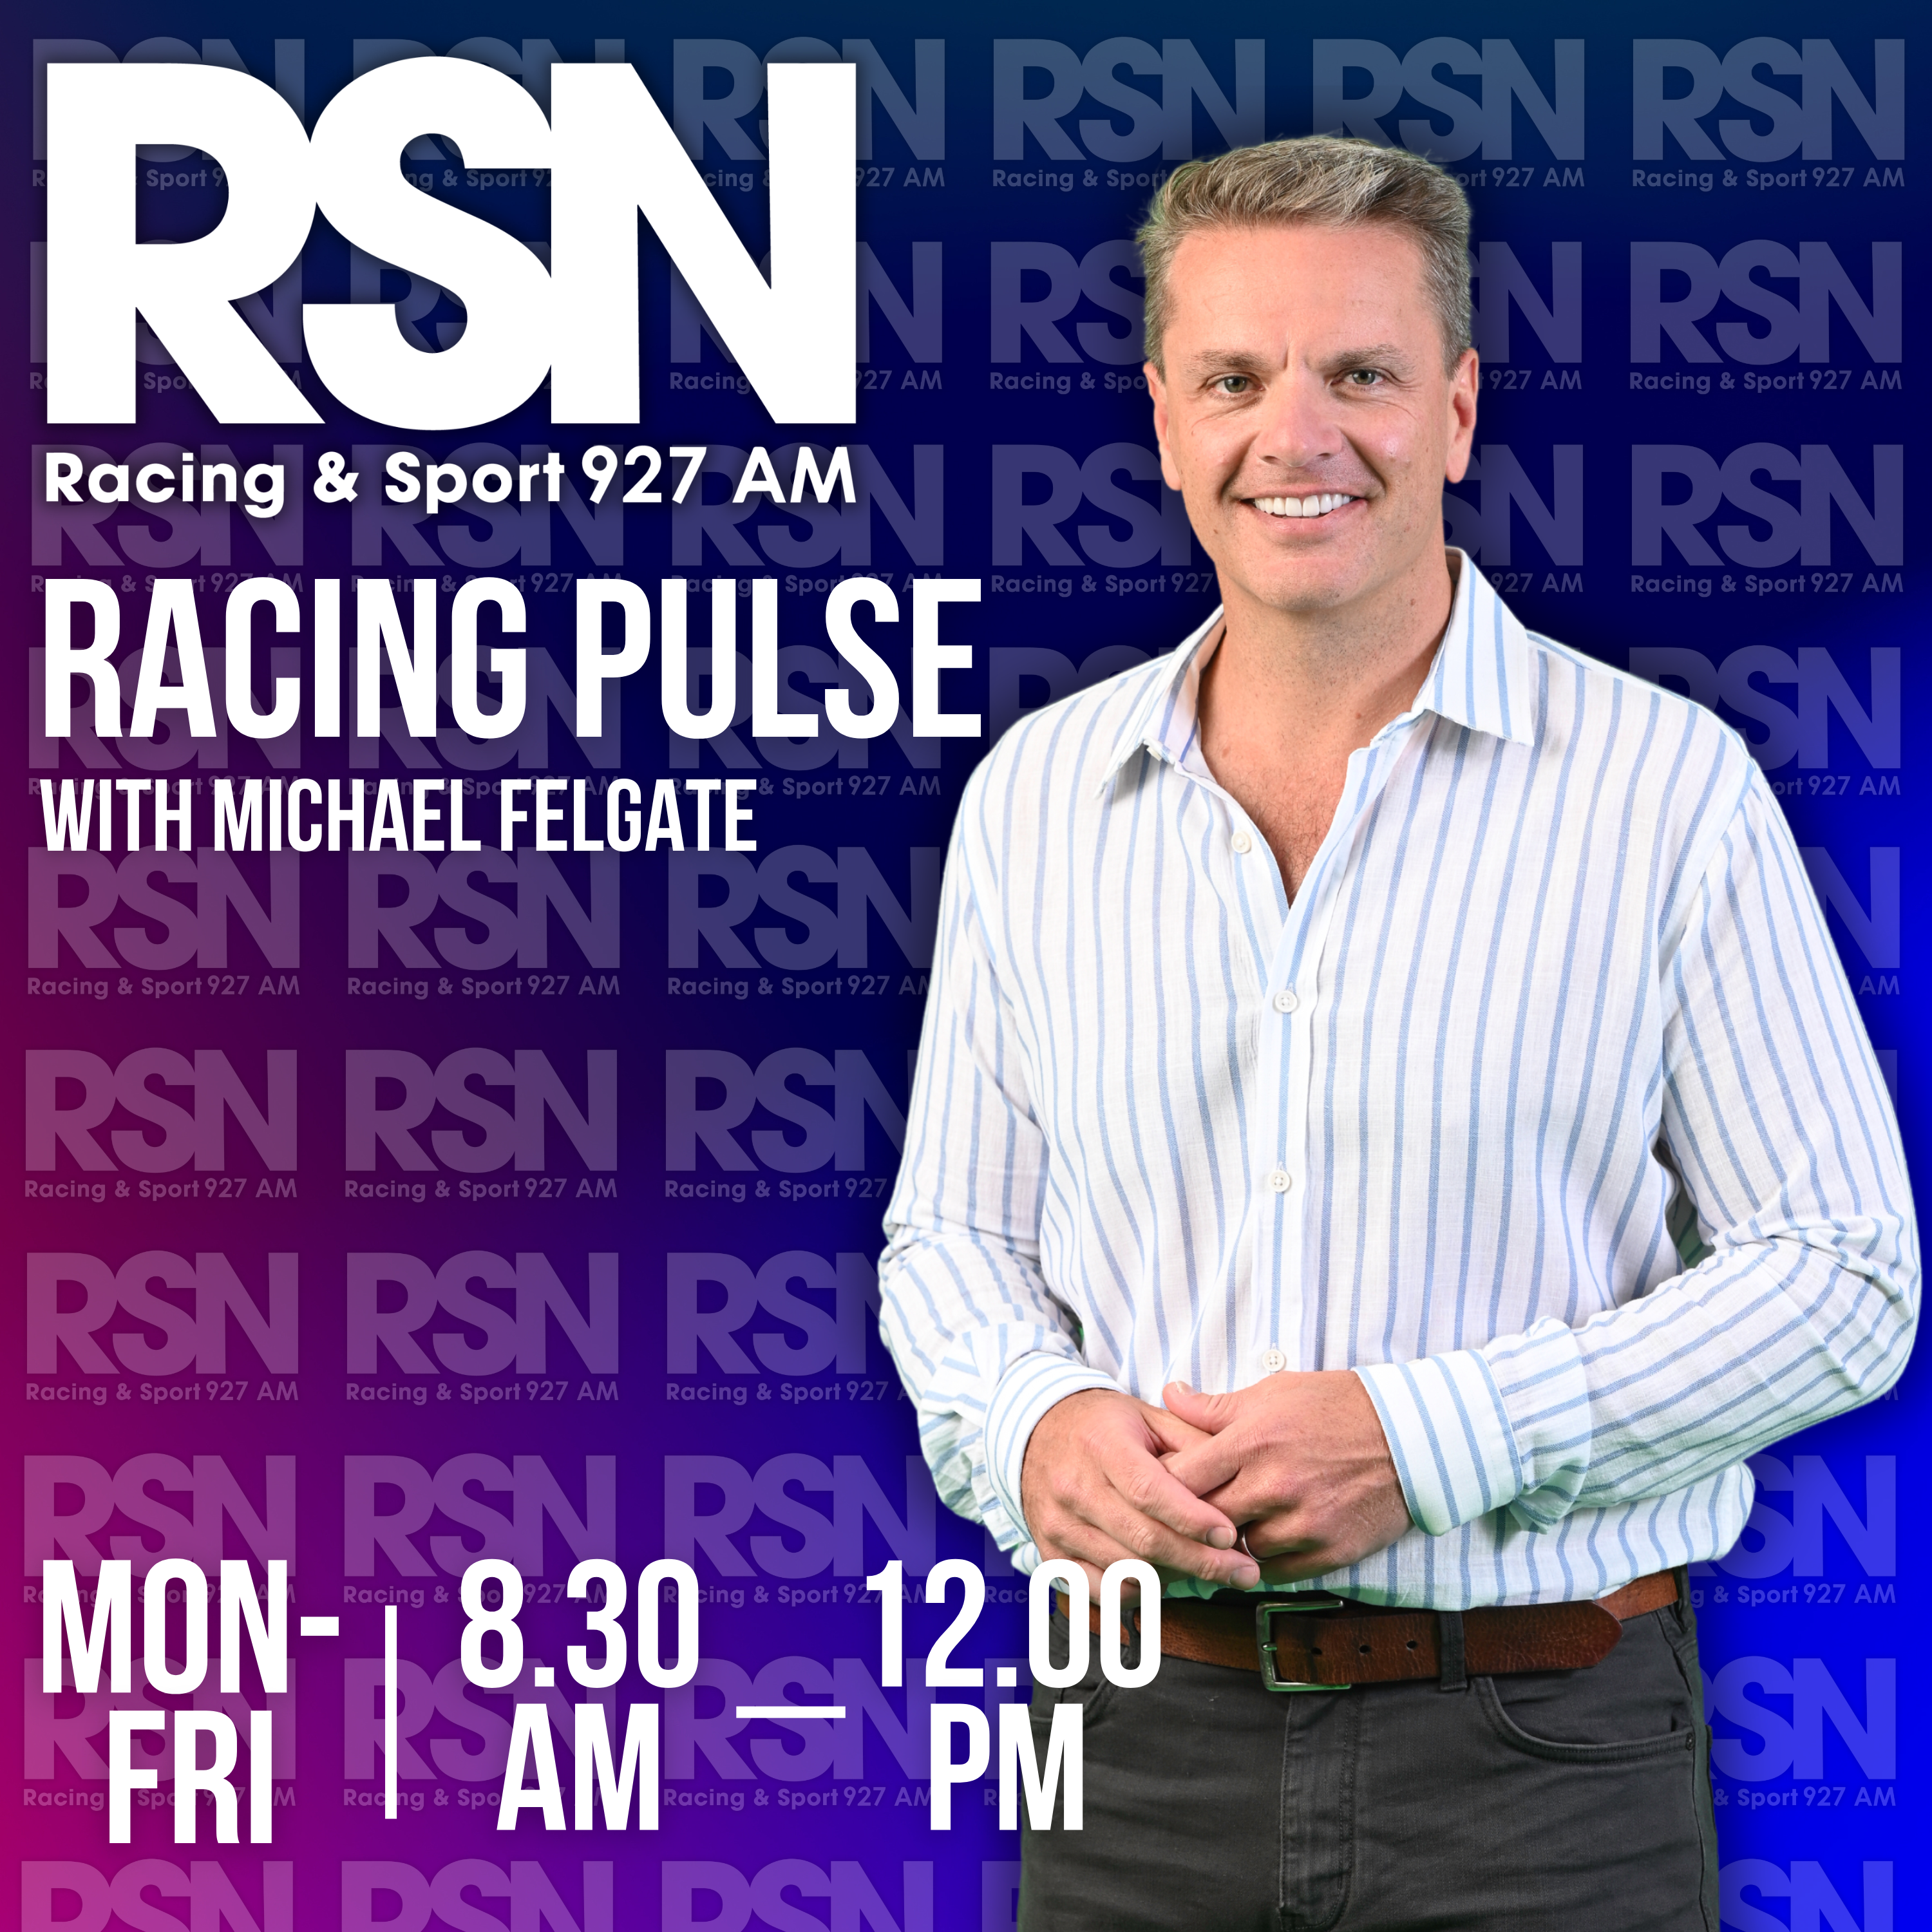 Mick Sharkie shares his weekend specials on RSN